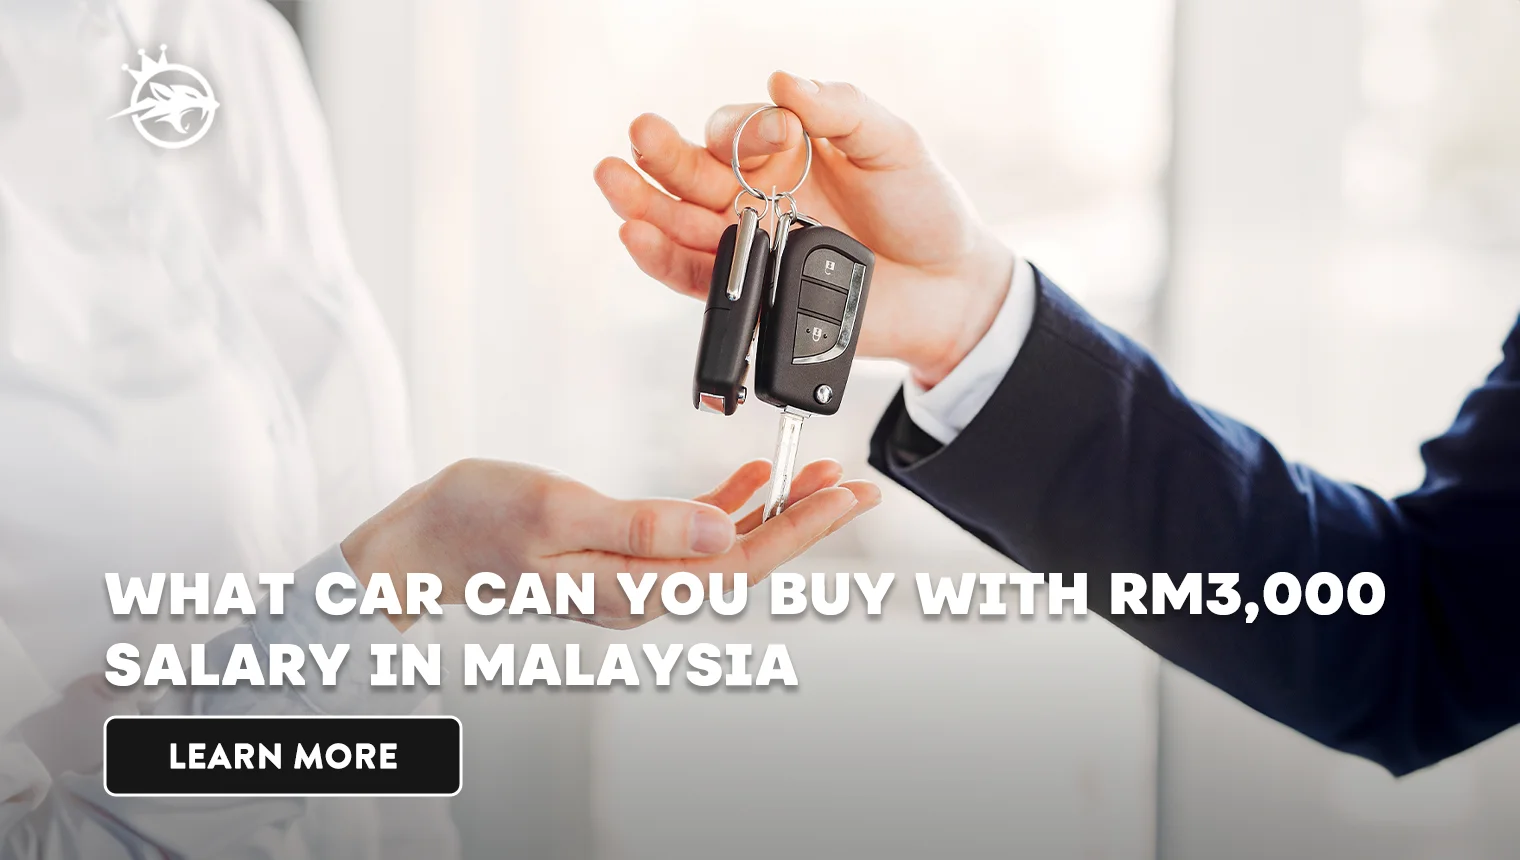 What car can you buy with RM3,000 salary in Malaysia in 2023?